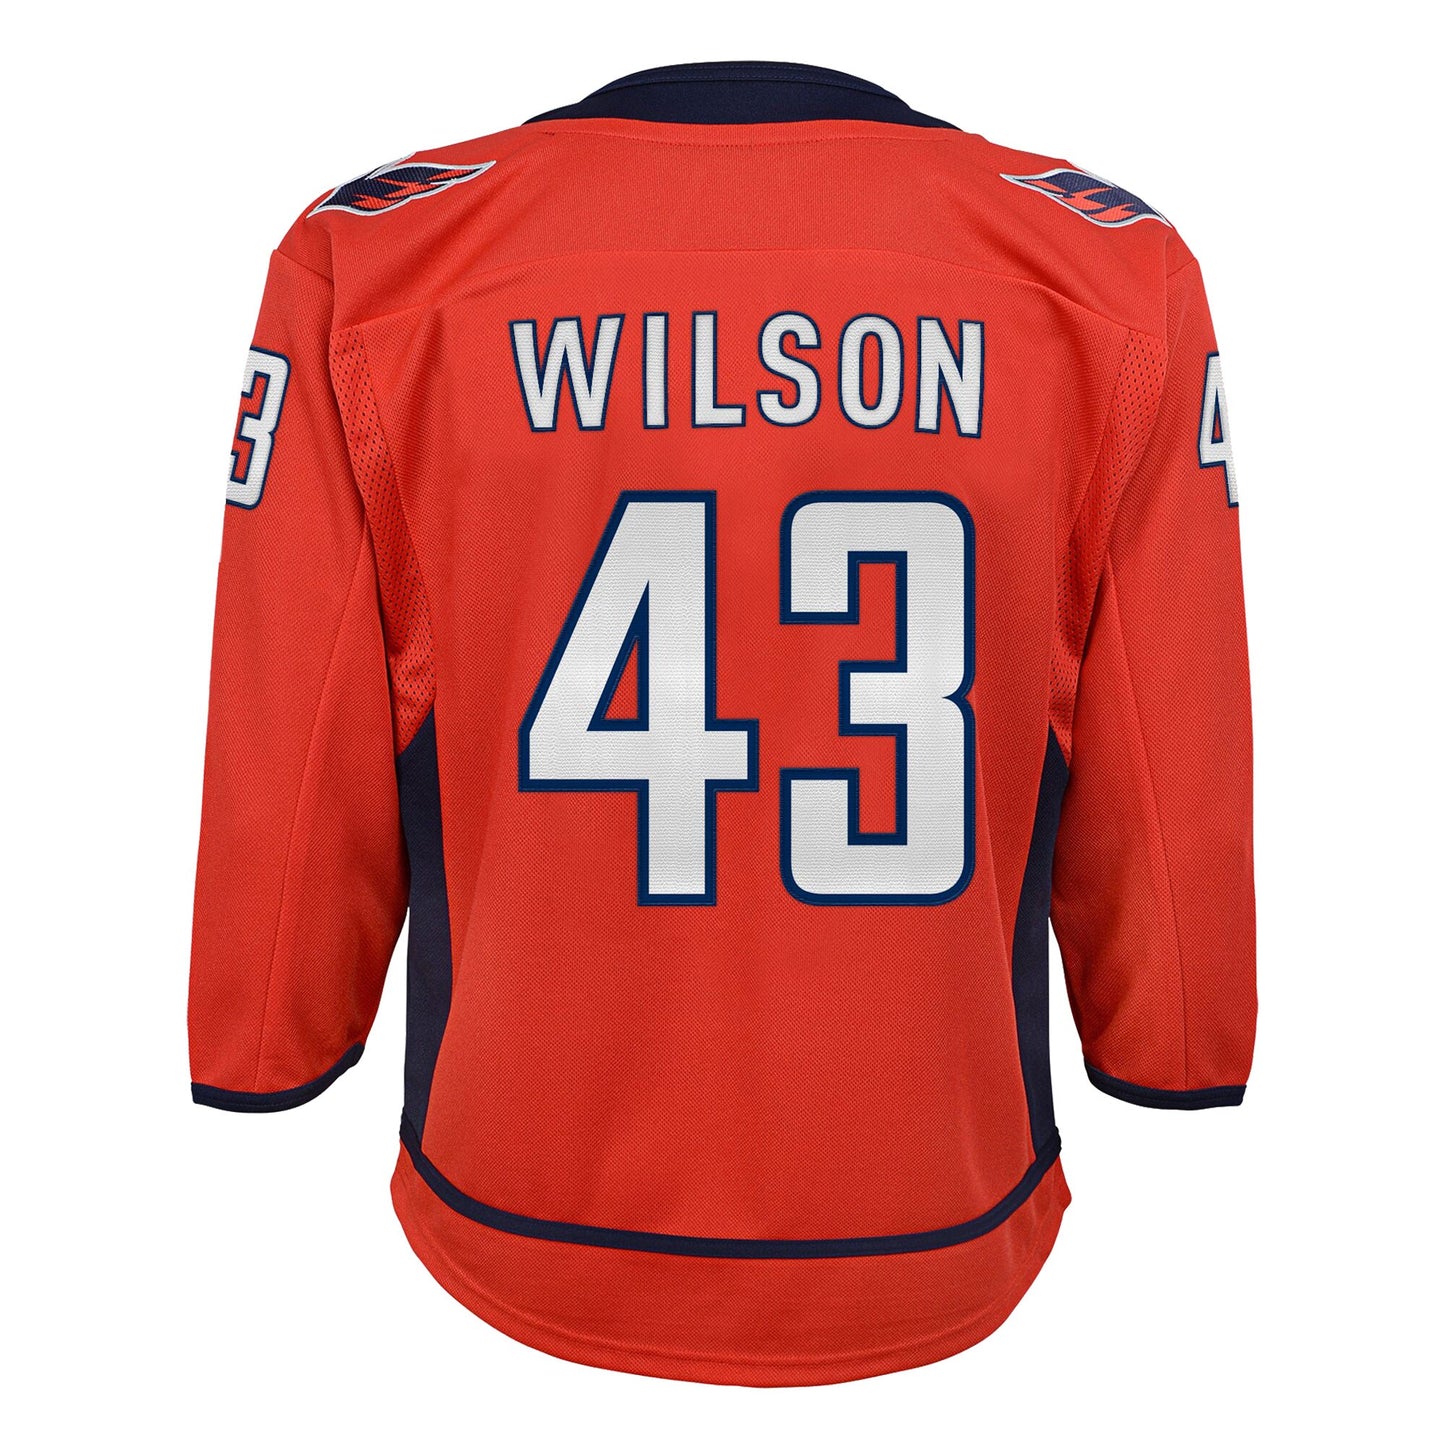 Tom Wilson Washington Capitals Youth 2022/23 Premier Player Jersey - Red